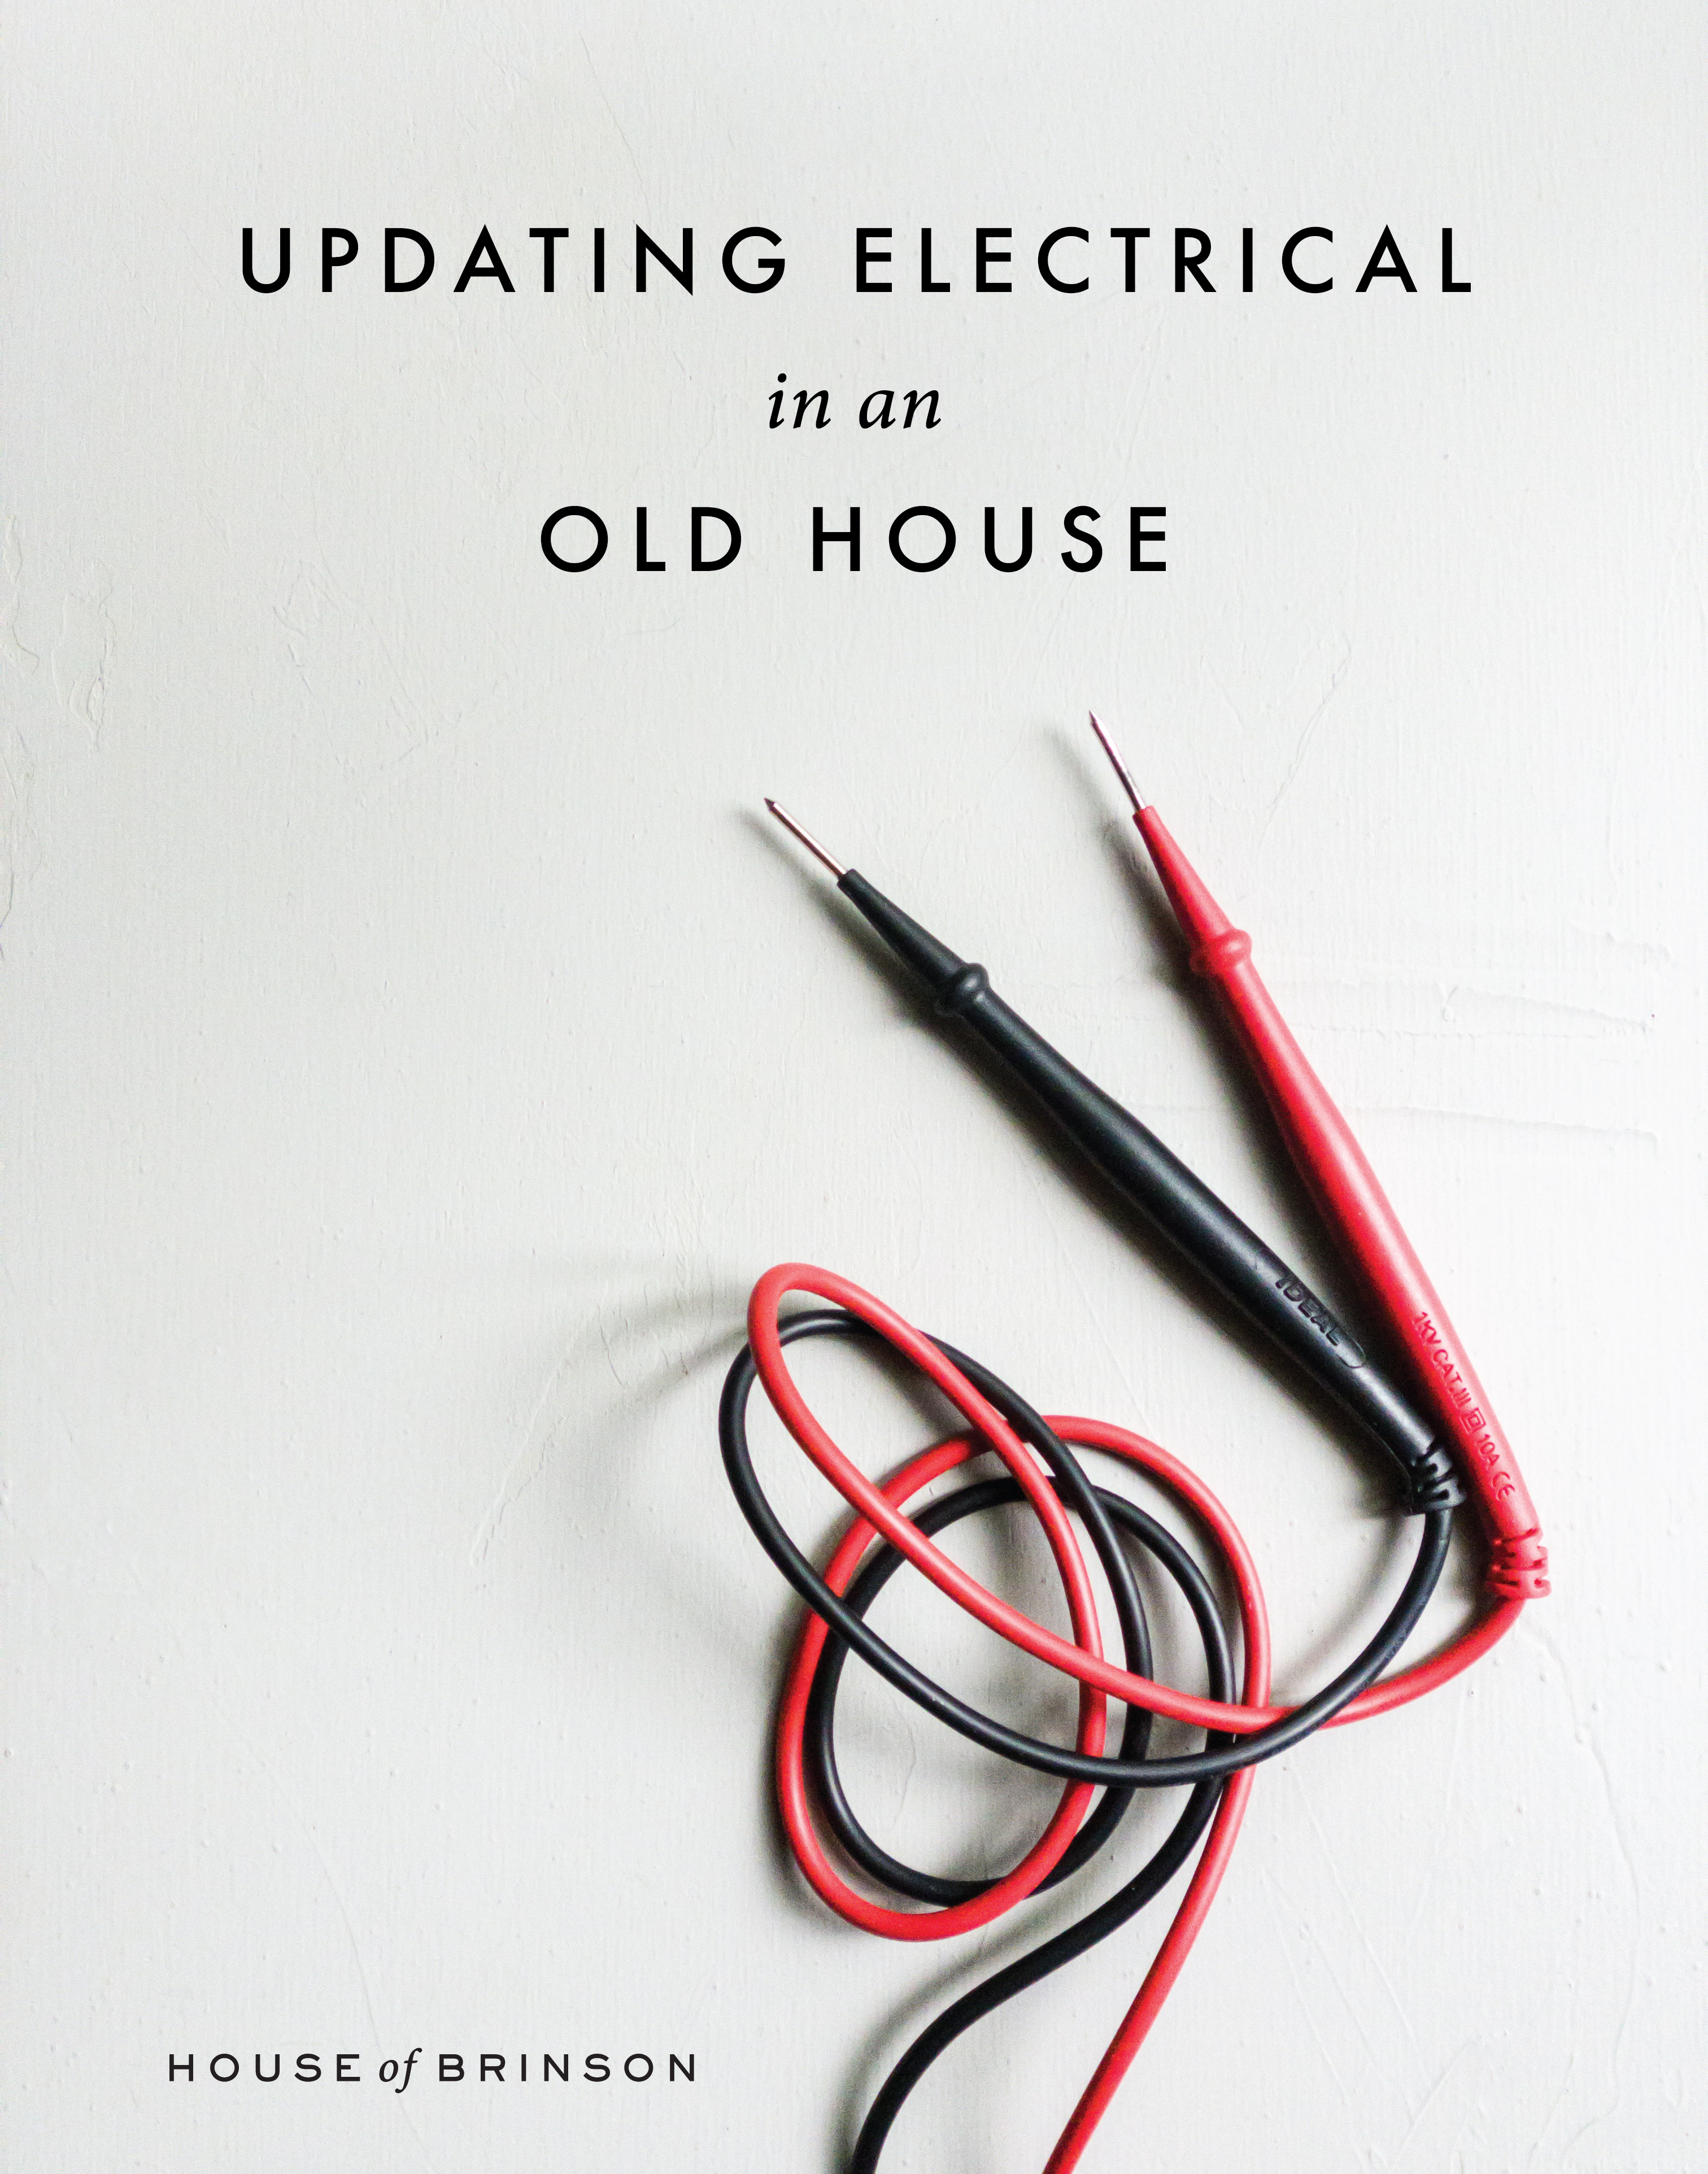 Updating The Electrical In An Old House, How To Update Electrical Wiring In Old House